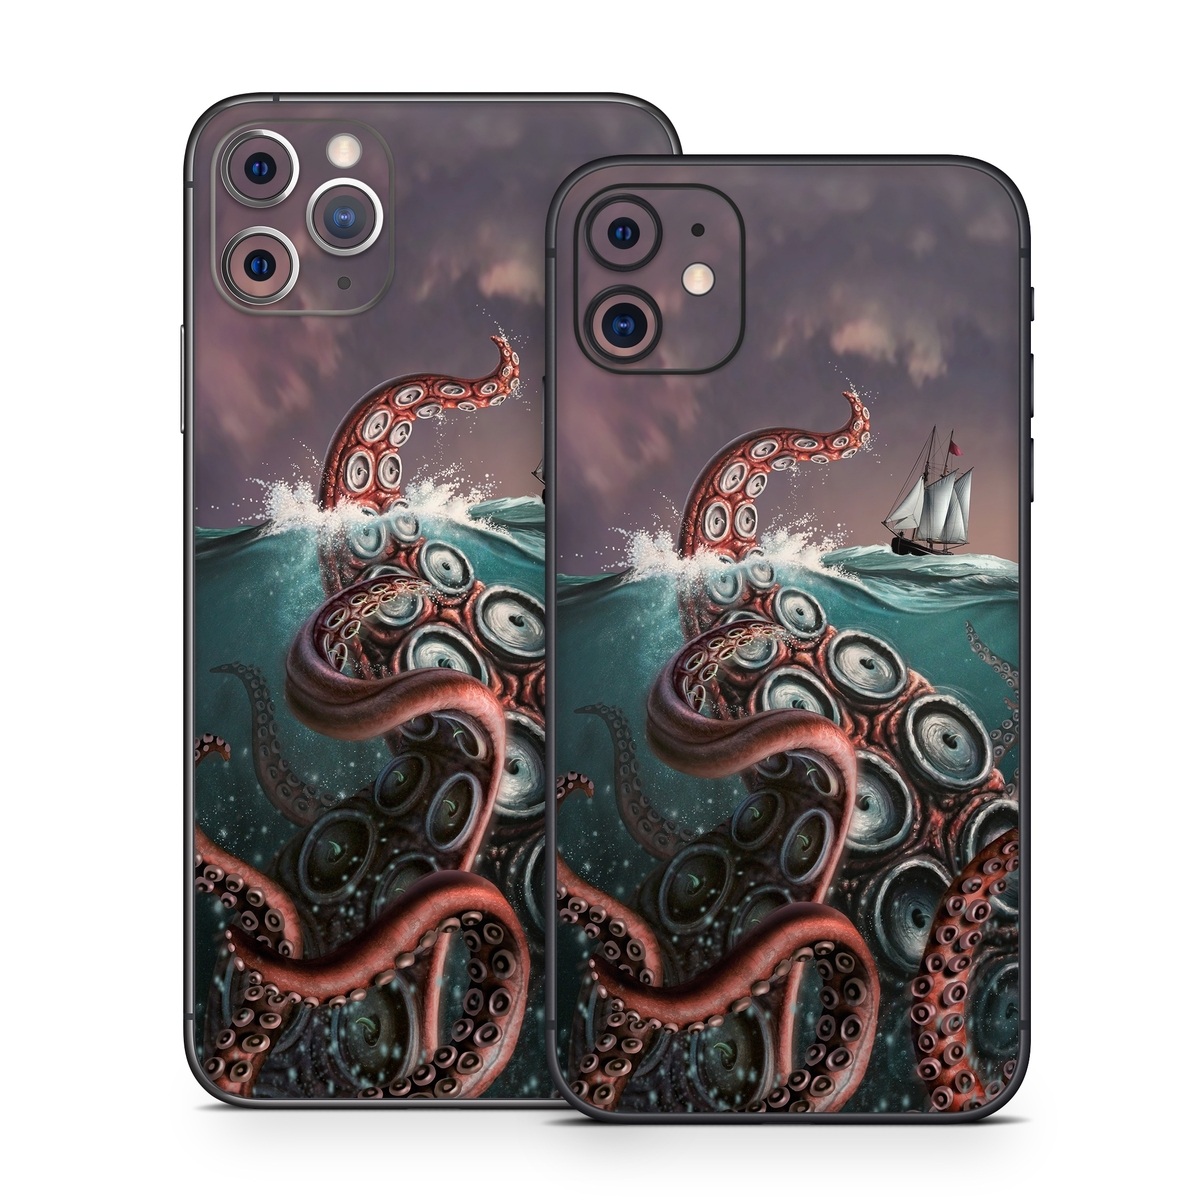 iPhone 11 Series Skin design of Octopus, Water, Illustration, Wind wave, Sky, Graphic design, Organism, Cephalopod, Cg artwork, giant pacific octopus, with blue, gray, white, brown, red colors